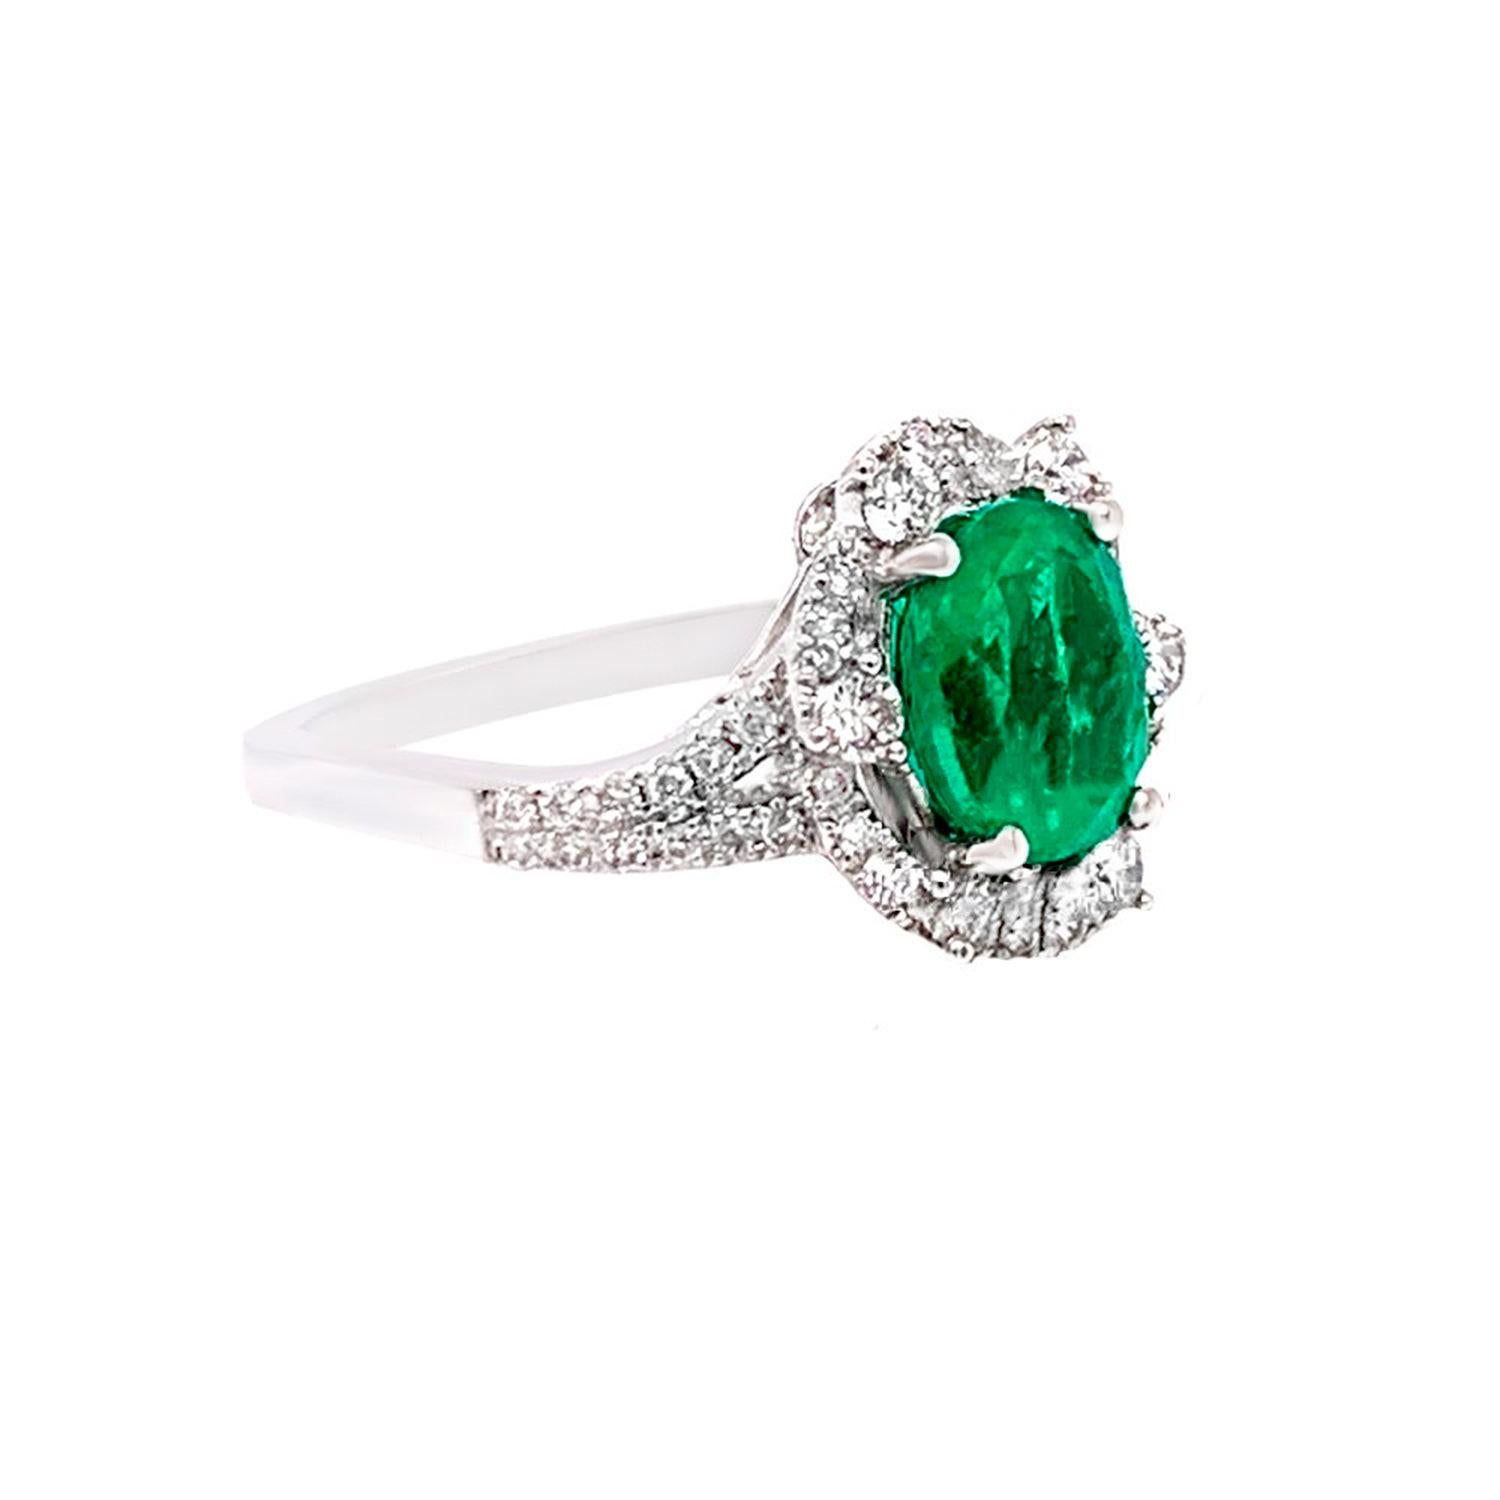 Emerald Ring With Diamonds 1.76 Carats 14K White Gold In Excellent Condition For Sale In Laguna Niguel, CA